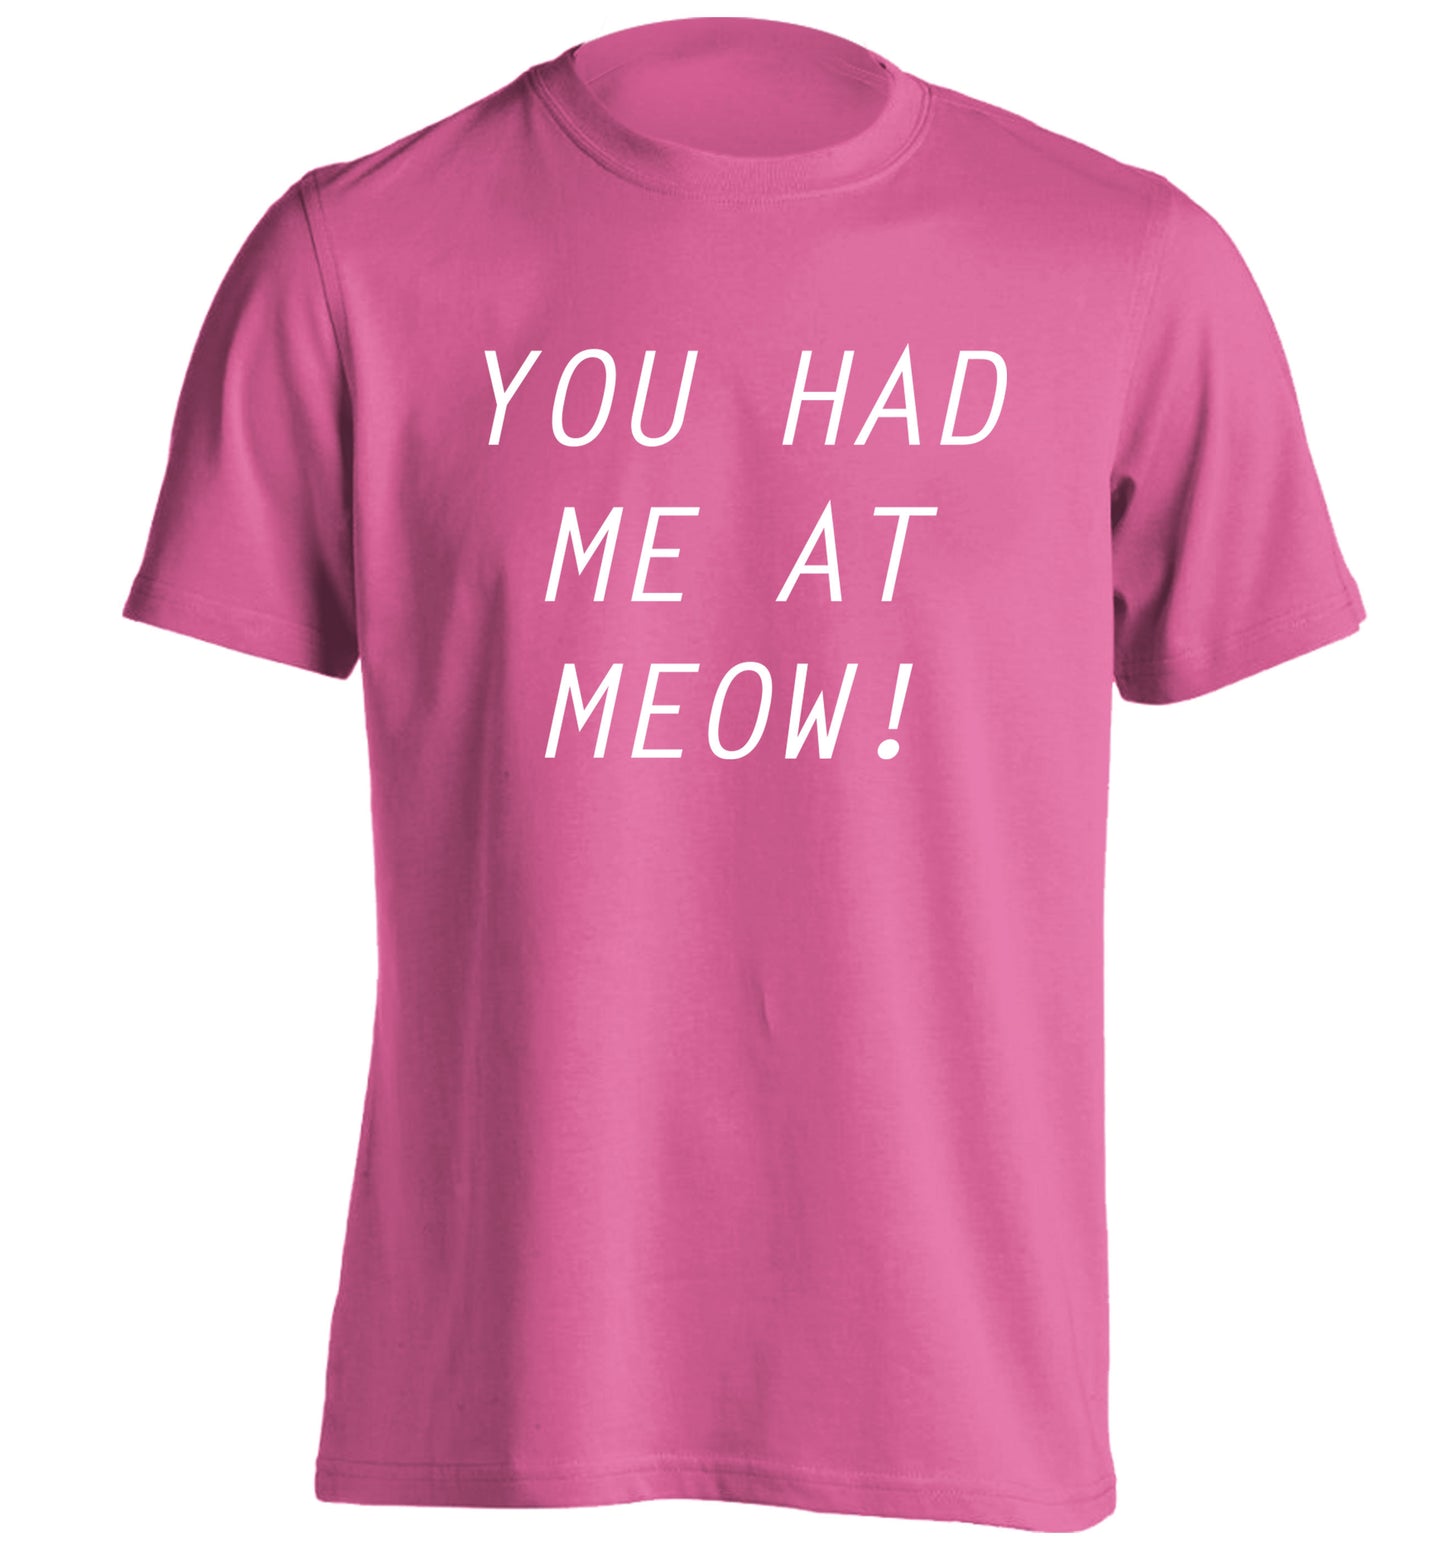 You had me at meow adults unisex pink Tshirt 2XL